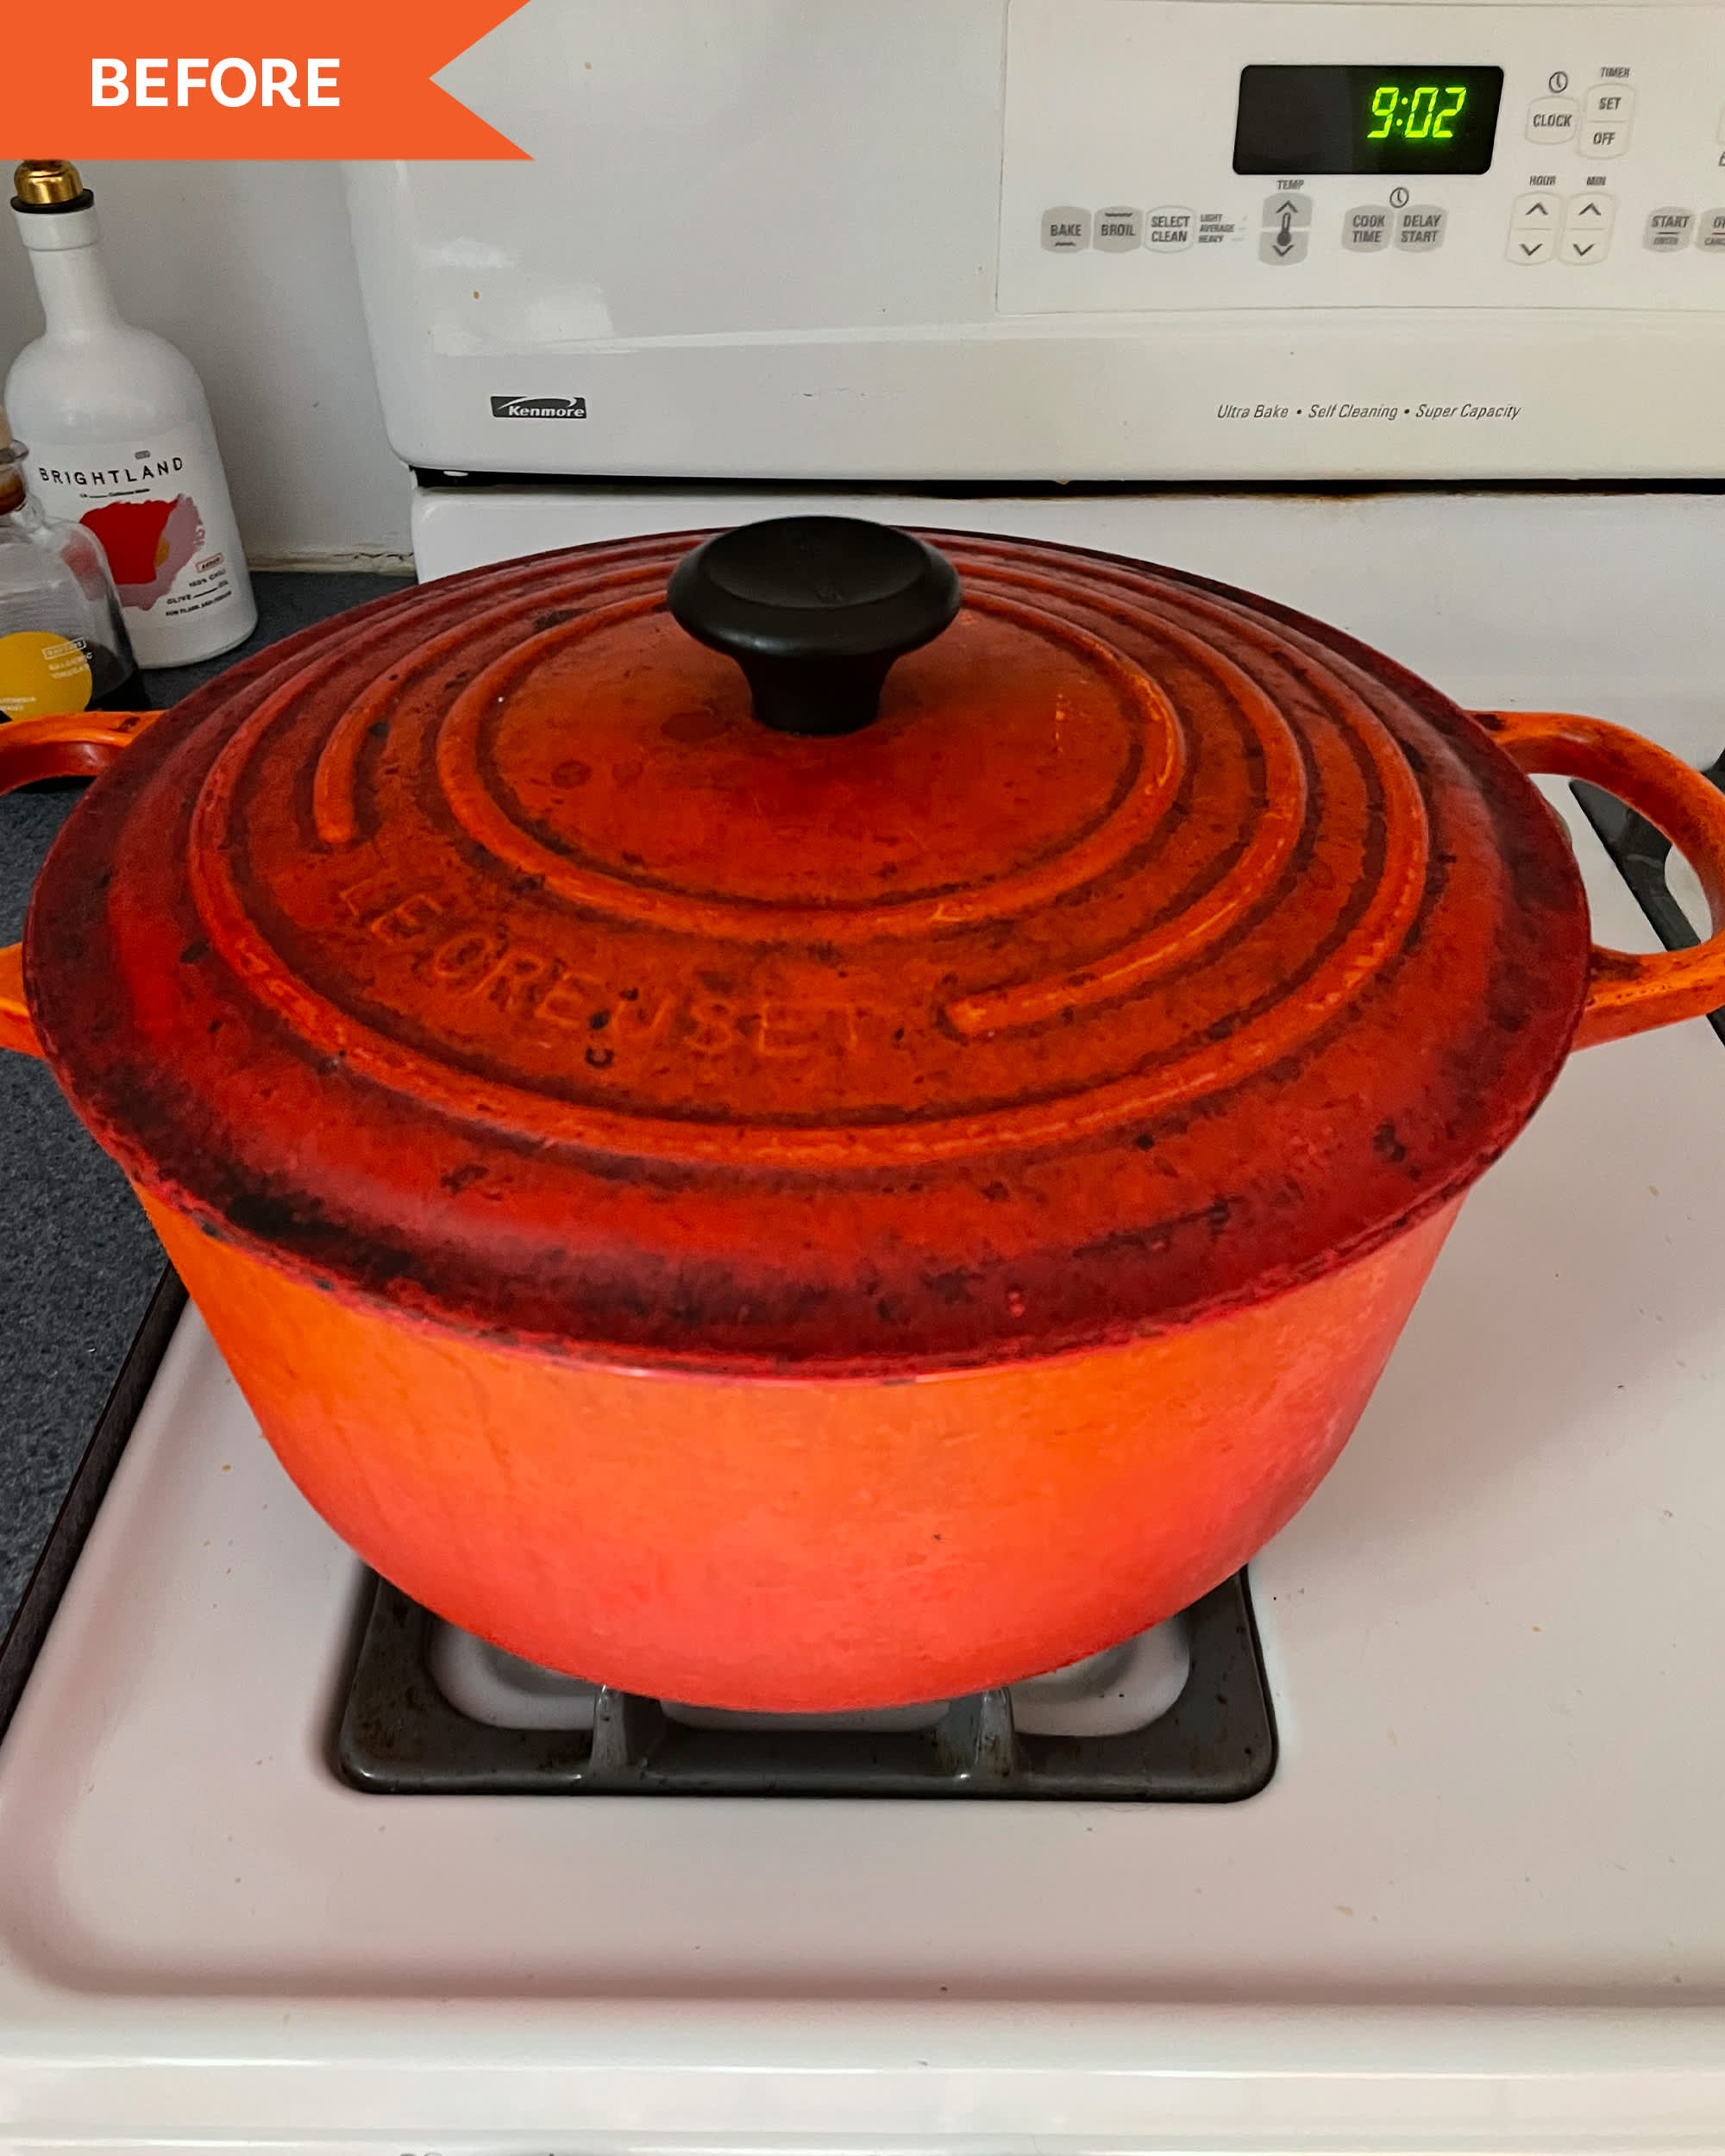 How to Clean a Le Creuset Dutch Oven